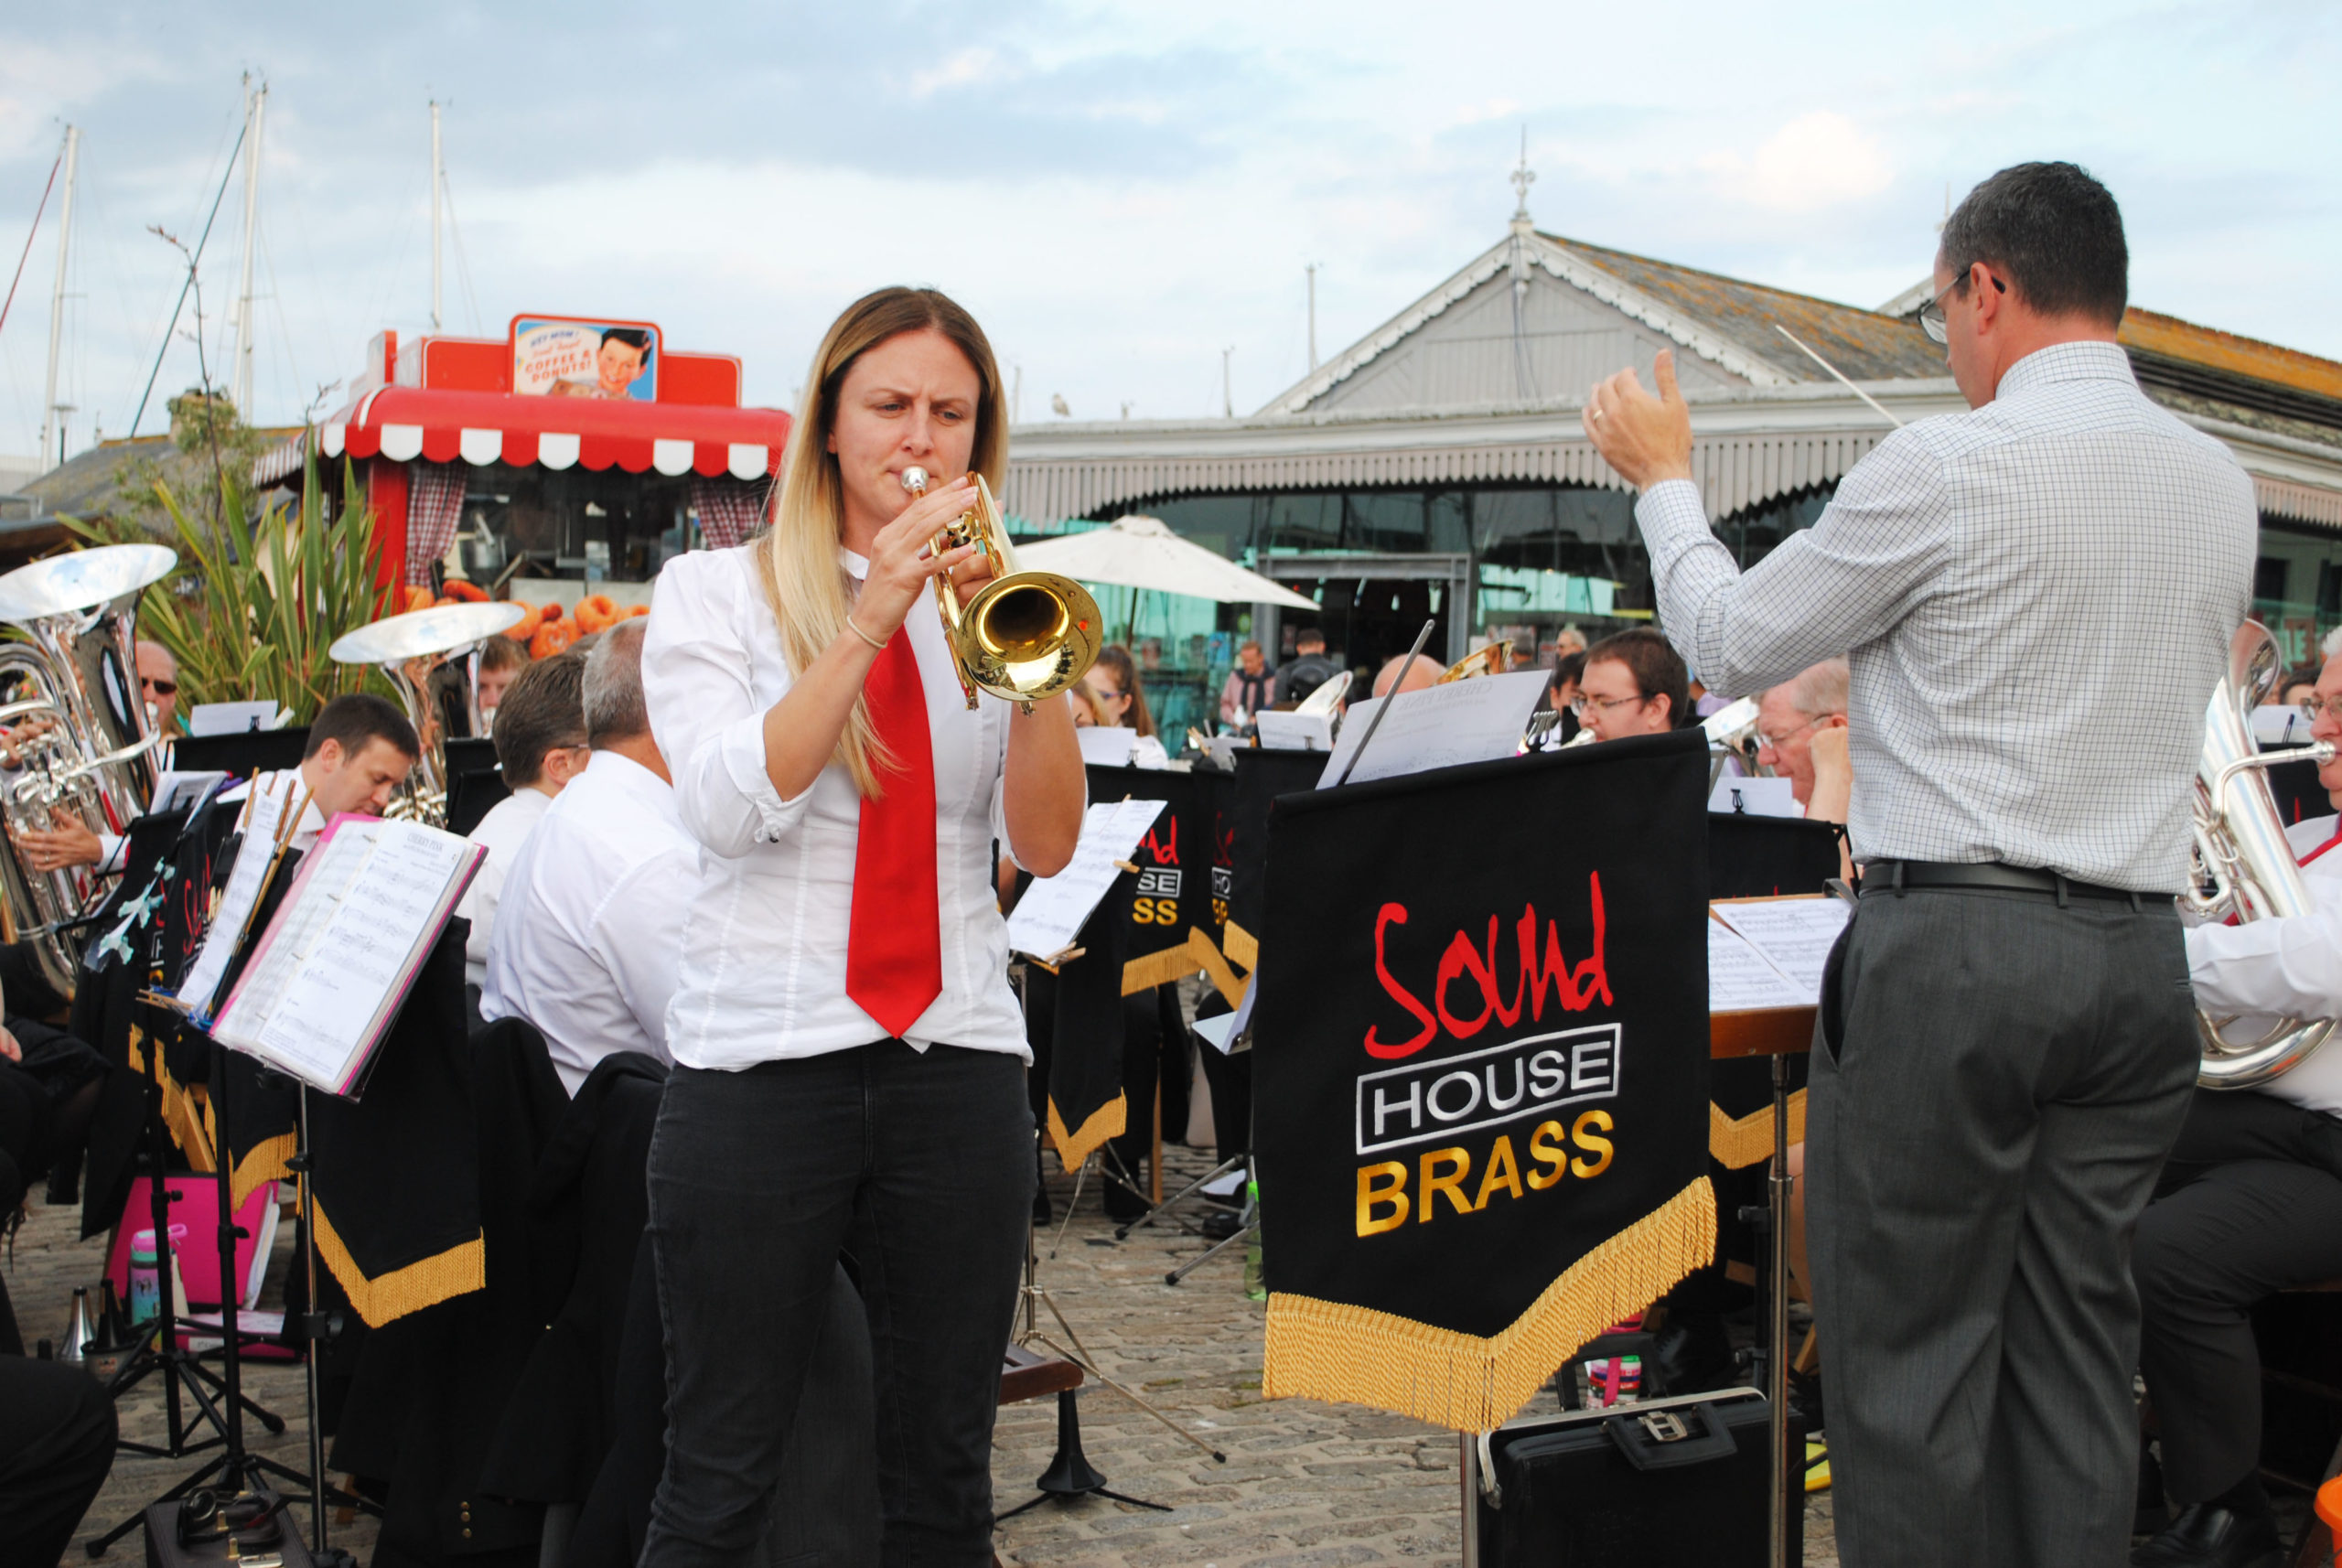 Brass band concerts return to Plymouth’s historic Sutton Harbour this summer